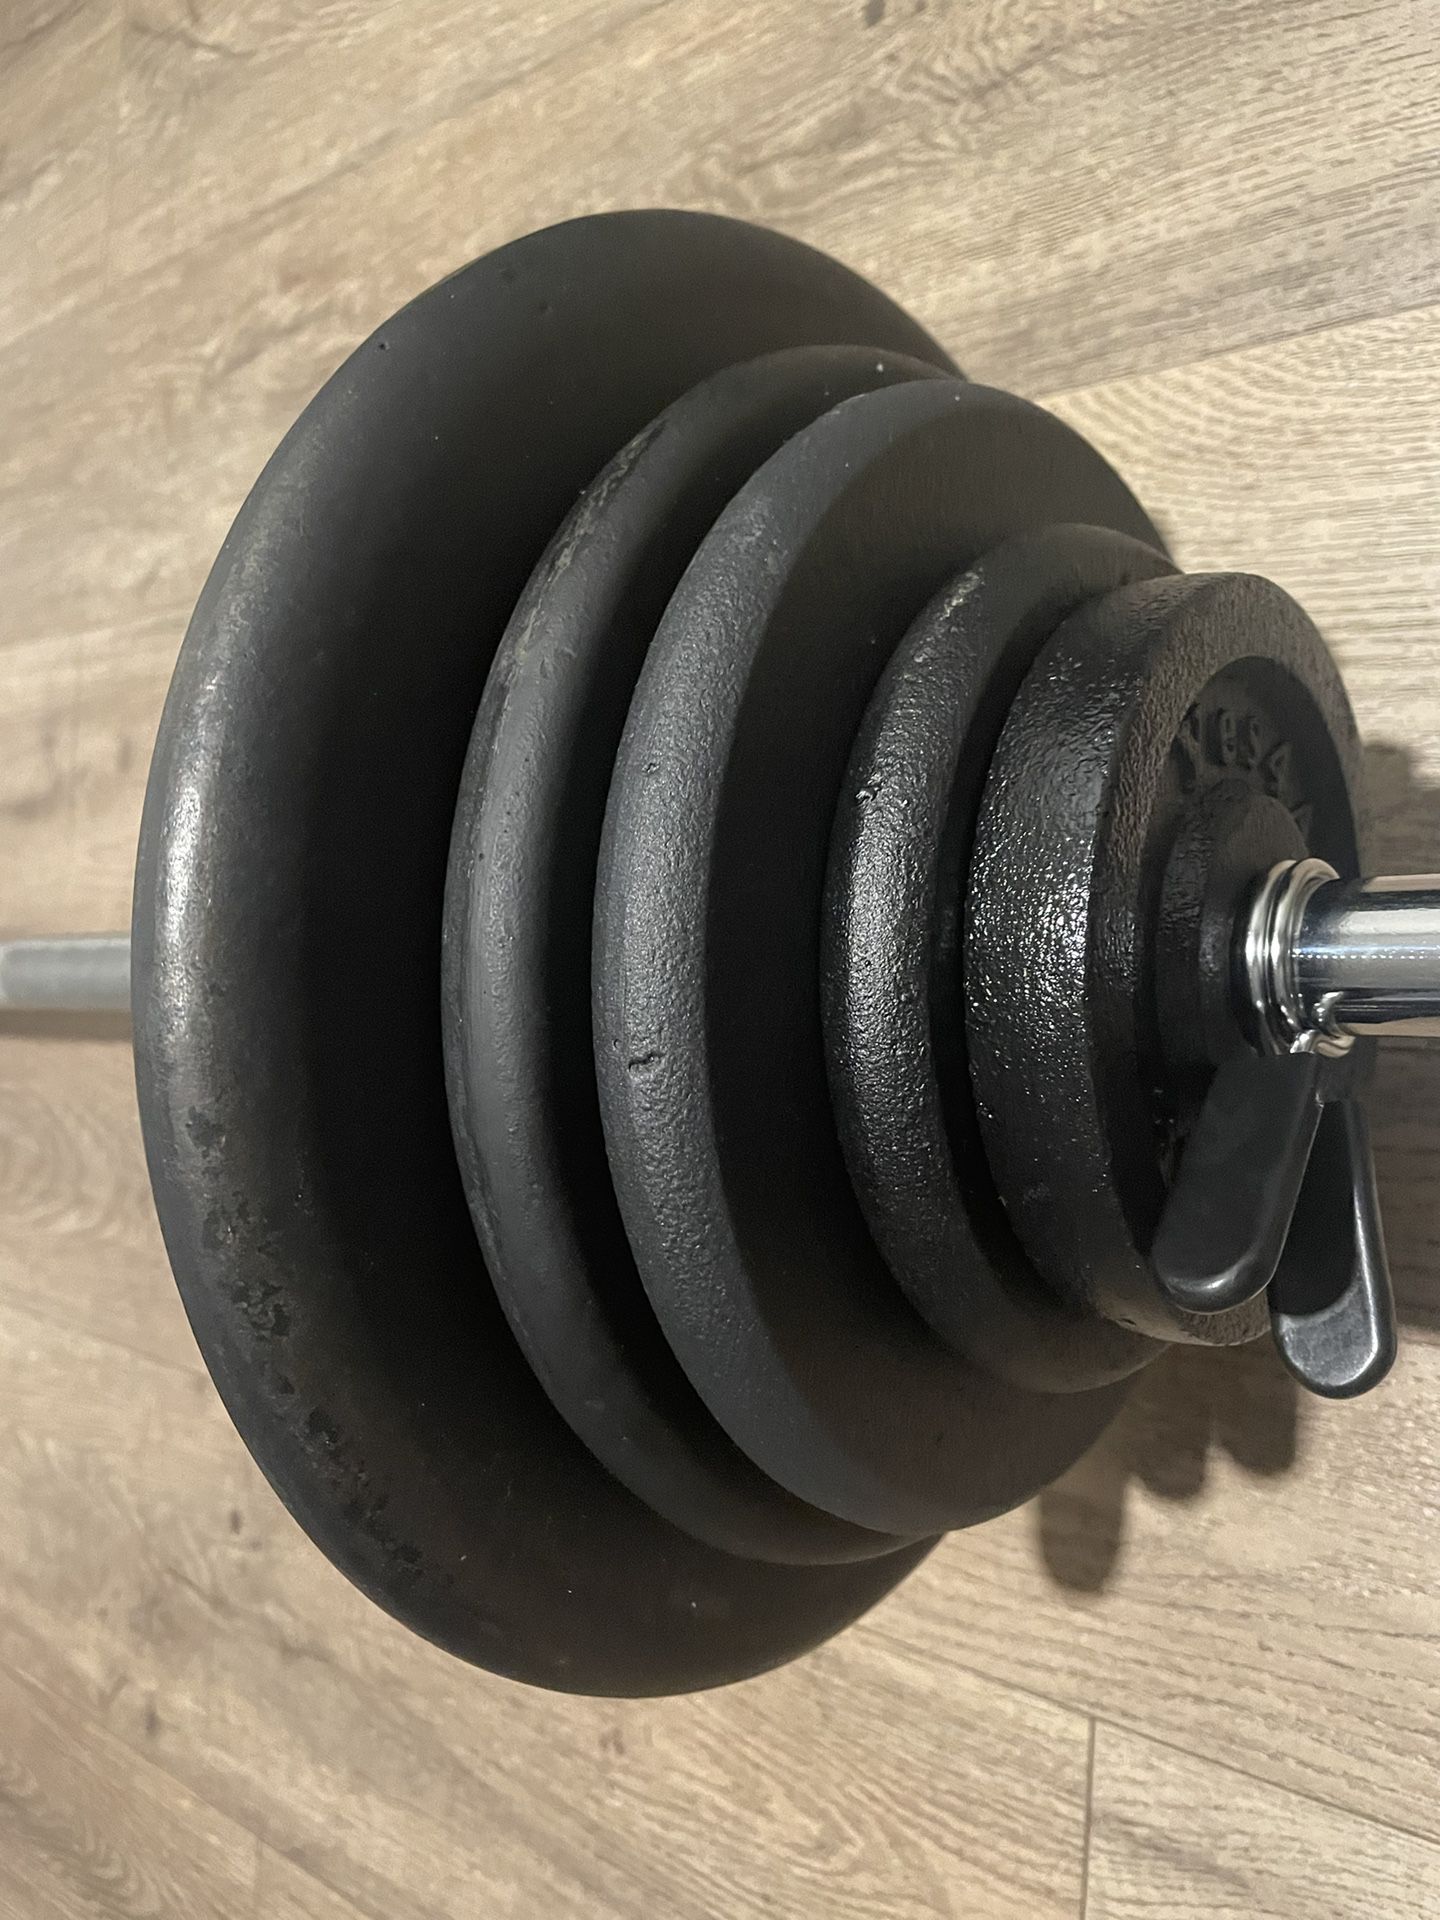 6 Ft Steel NEW Barbell With Weight Plates Total: 131 lbs